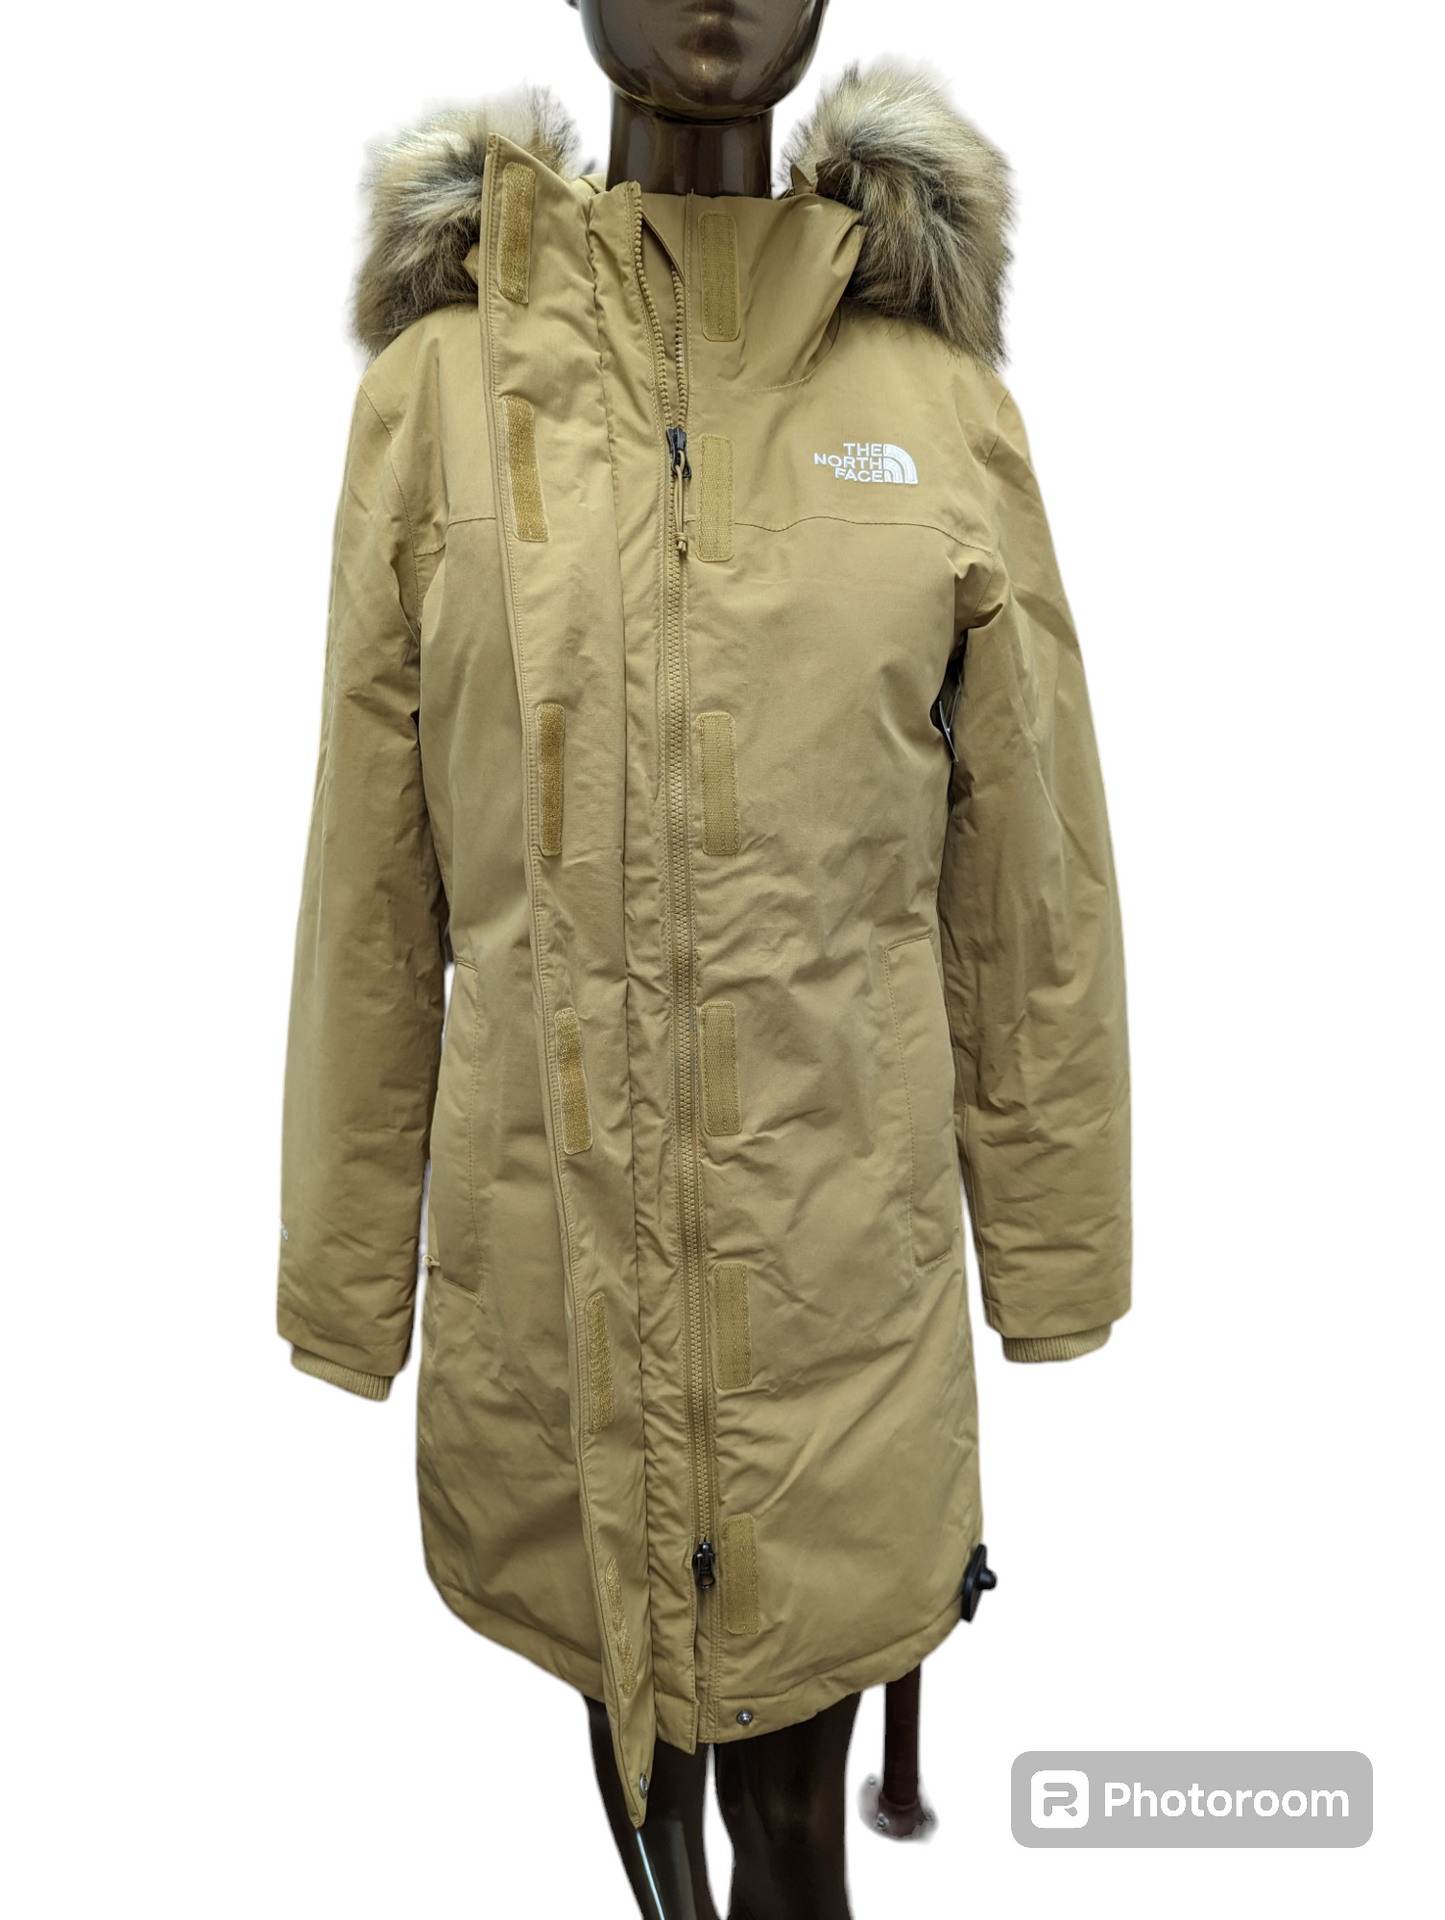 Coat Parka By The North Face  Size: Xs